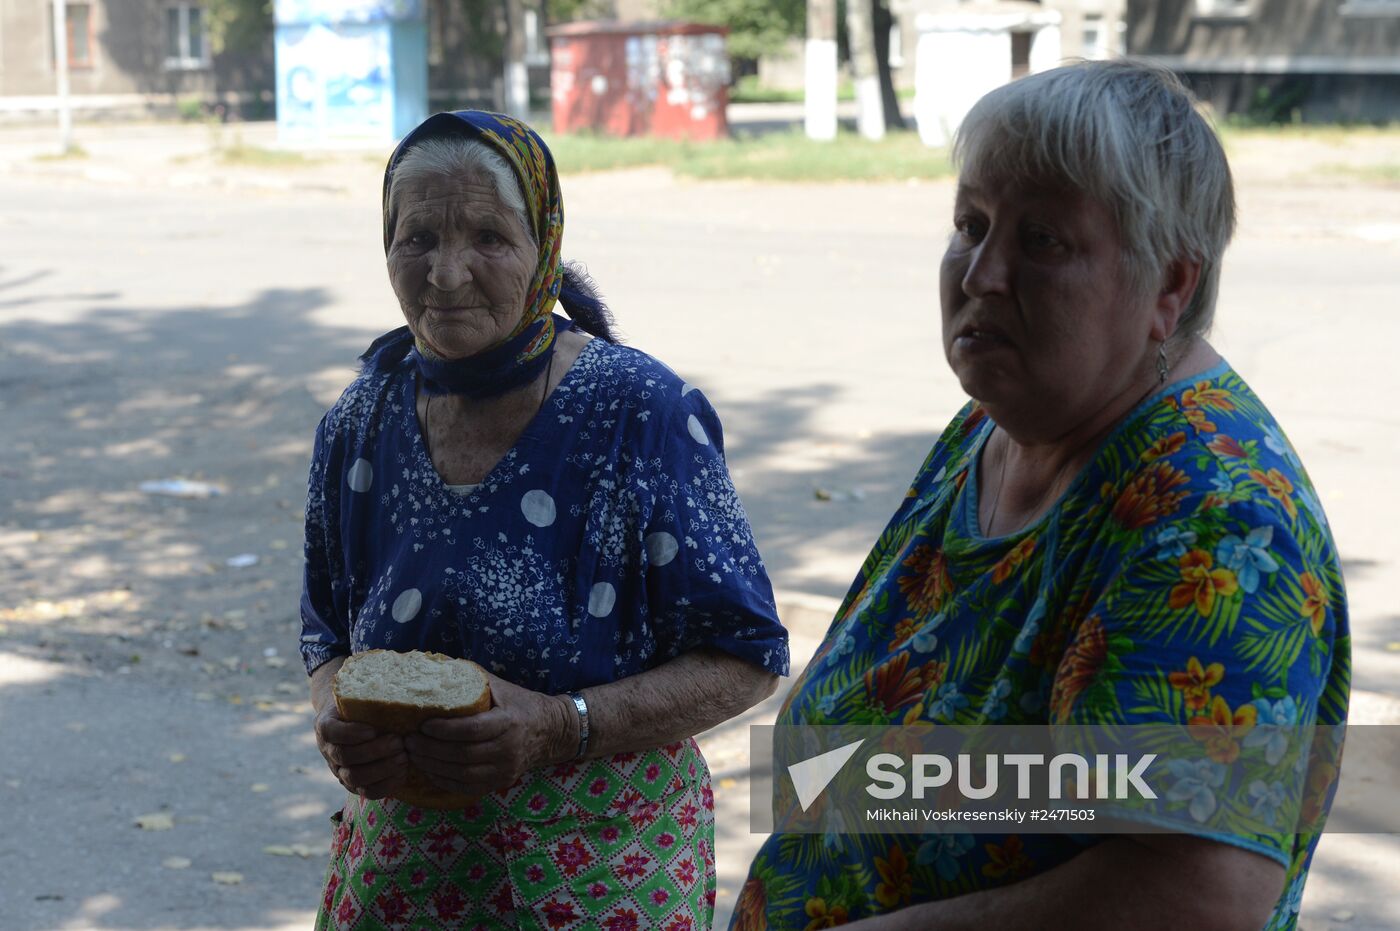 Gorlovka residents receive humanitarian aid from self-defense forces